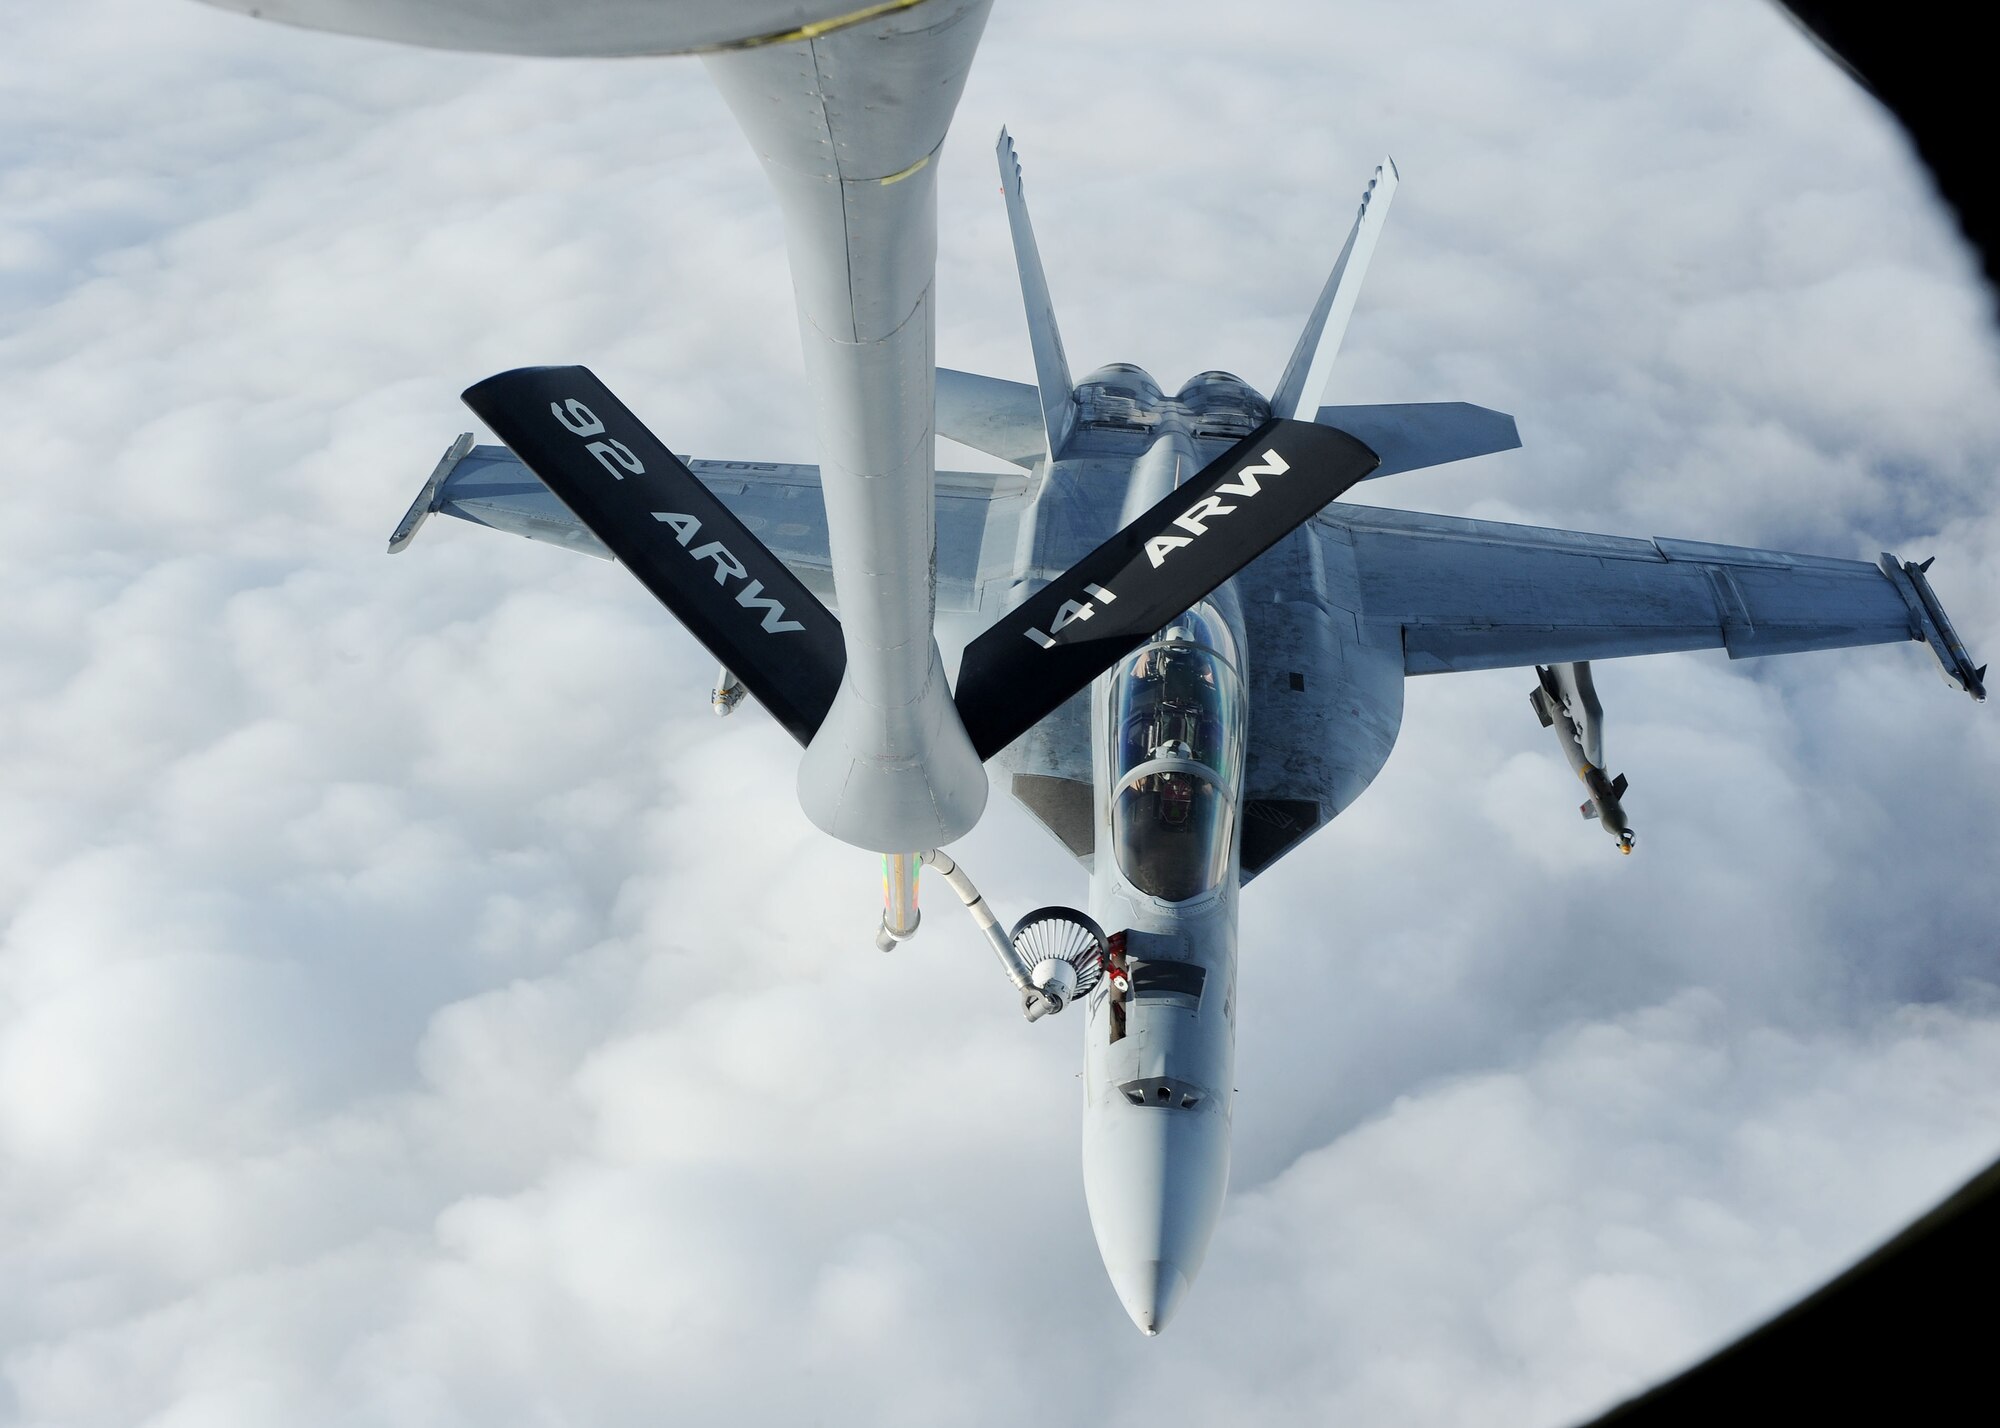 A U.S. Navy F/A-18 Hornet Strikefighter receives fuel from a 22nd Expeditionary Air Refueling Squadron KC-135 Stratotanker over Afghanistan April 10, 2010. The day of April 10 made 22nd EARS history when an air crew logged the 16,000th sortie. (U.S. Air Force photo/Senior Airman Nichelle Anderson/released)